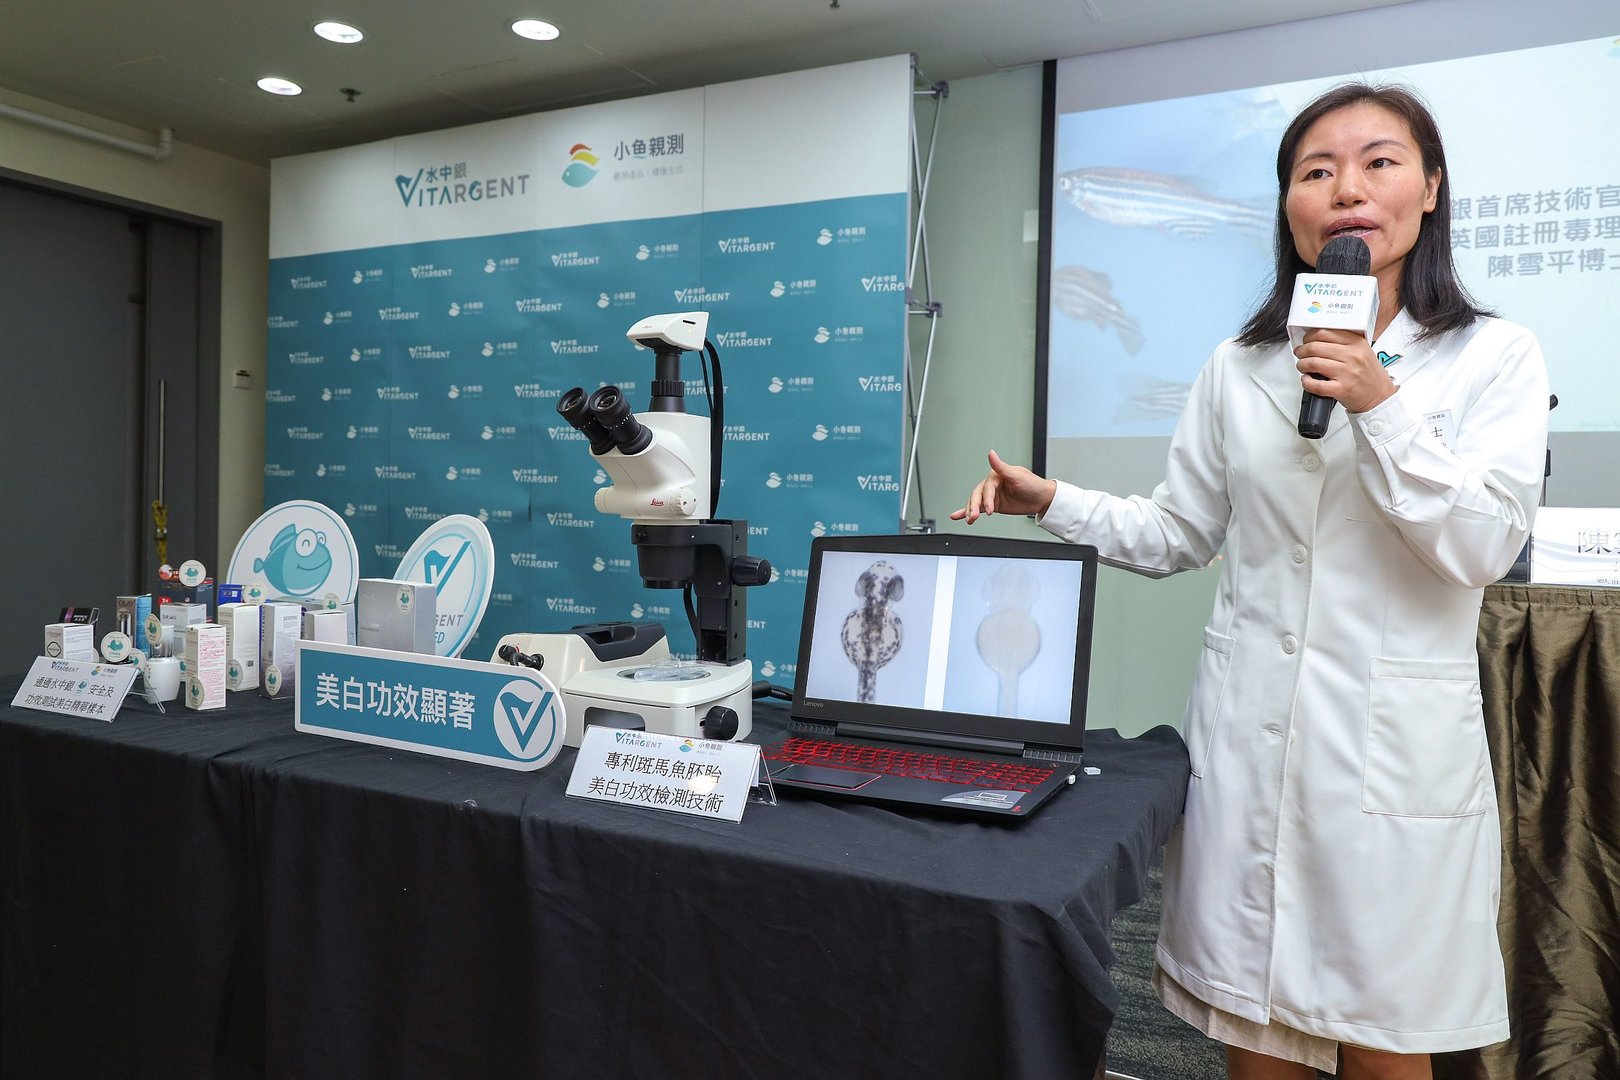 Dr Chen Xueping gives a presentation on the zebrafish embryo testing for whitening essence of skincare products.